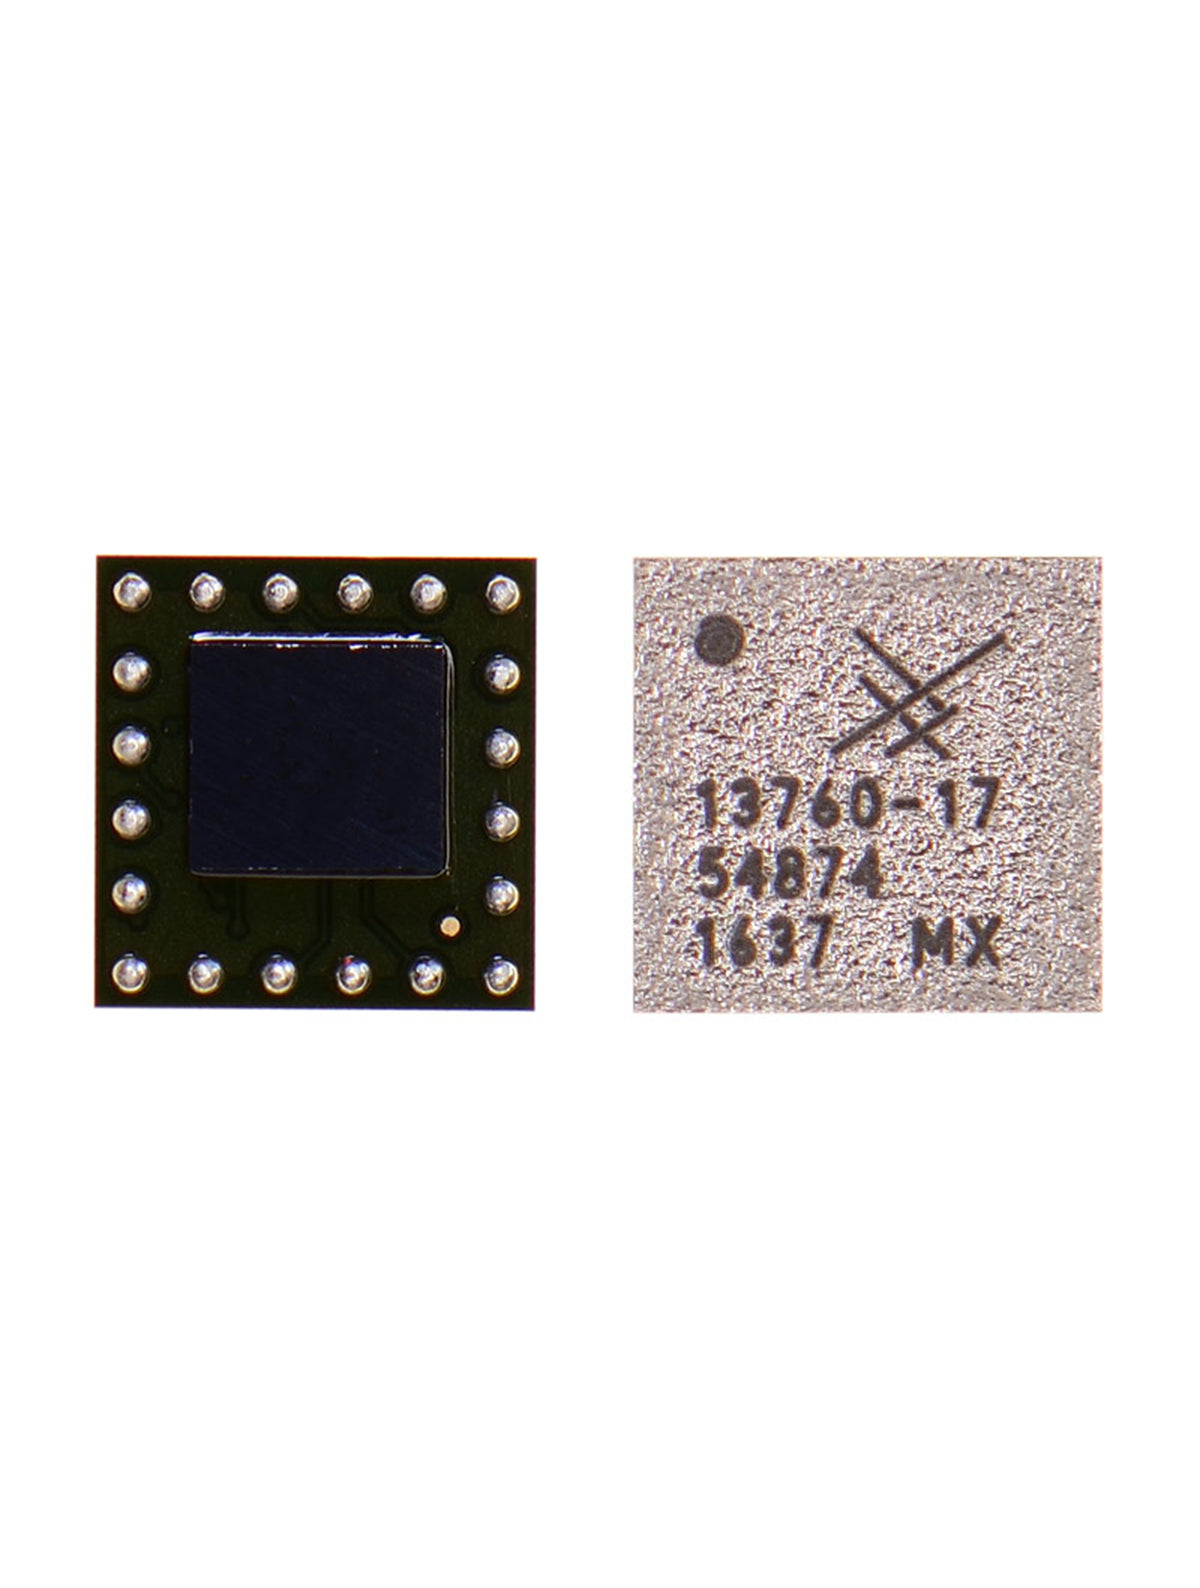 DSM - LB - E PA IC COMPATIBLE WITH IPHONE X